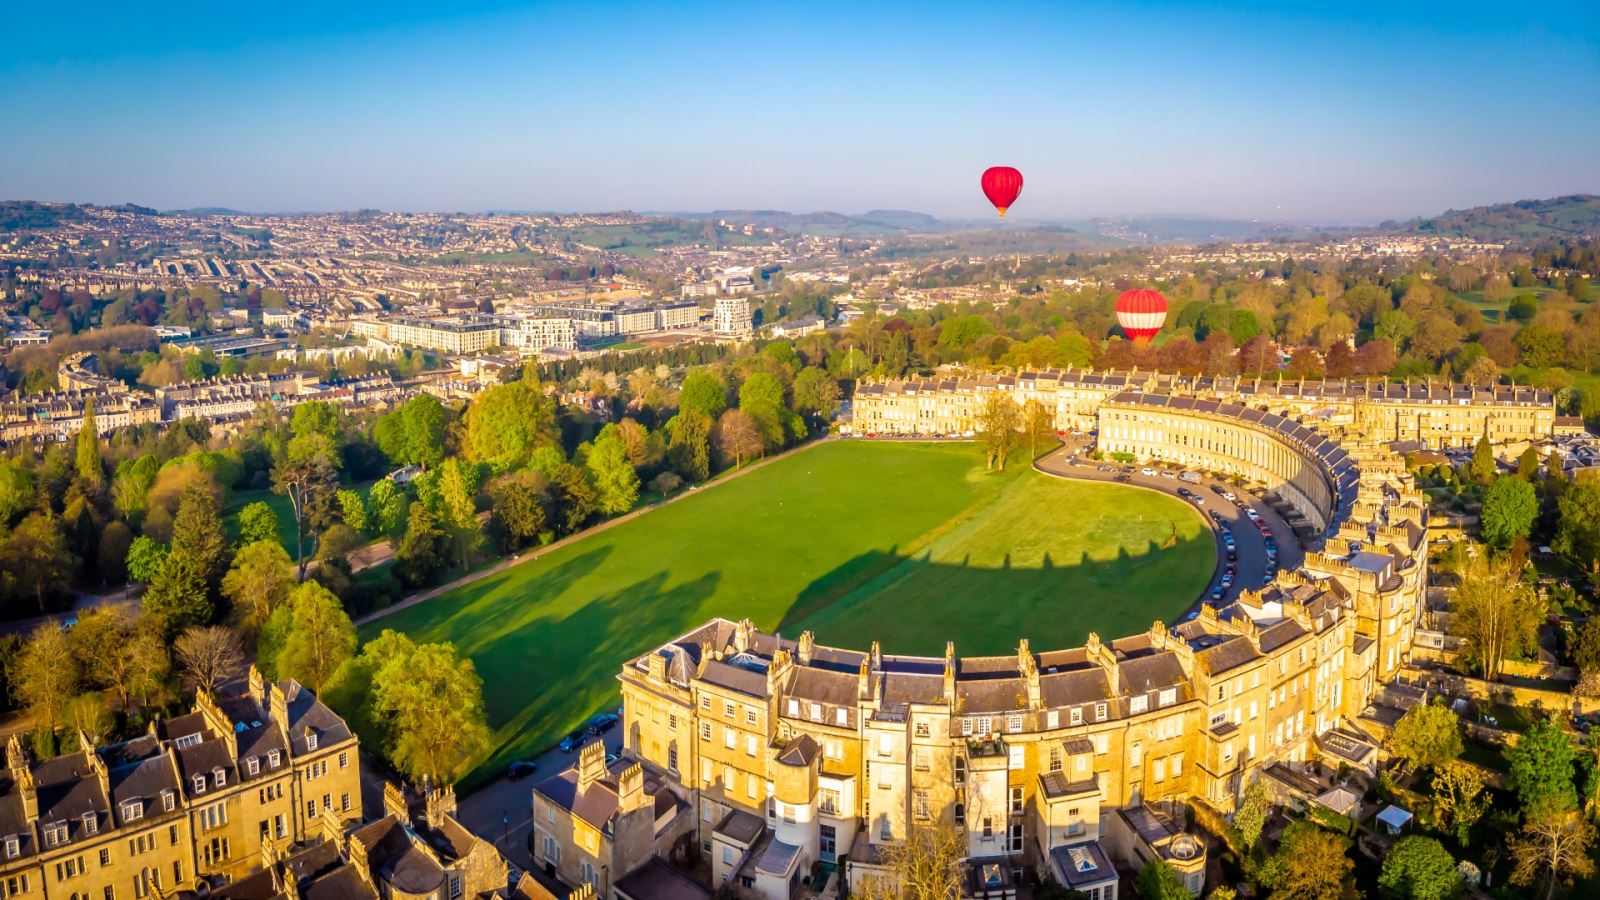 Hot air balloon flying over the Royal Crescent in Bath